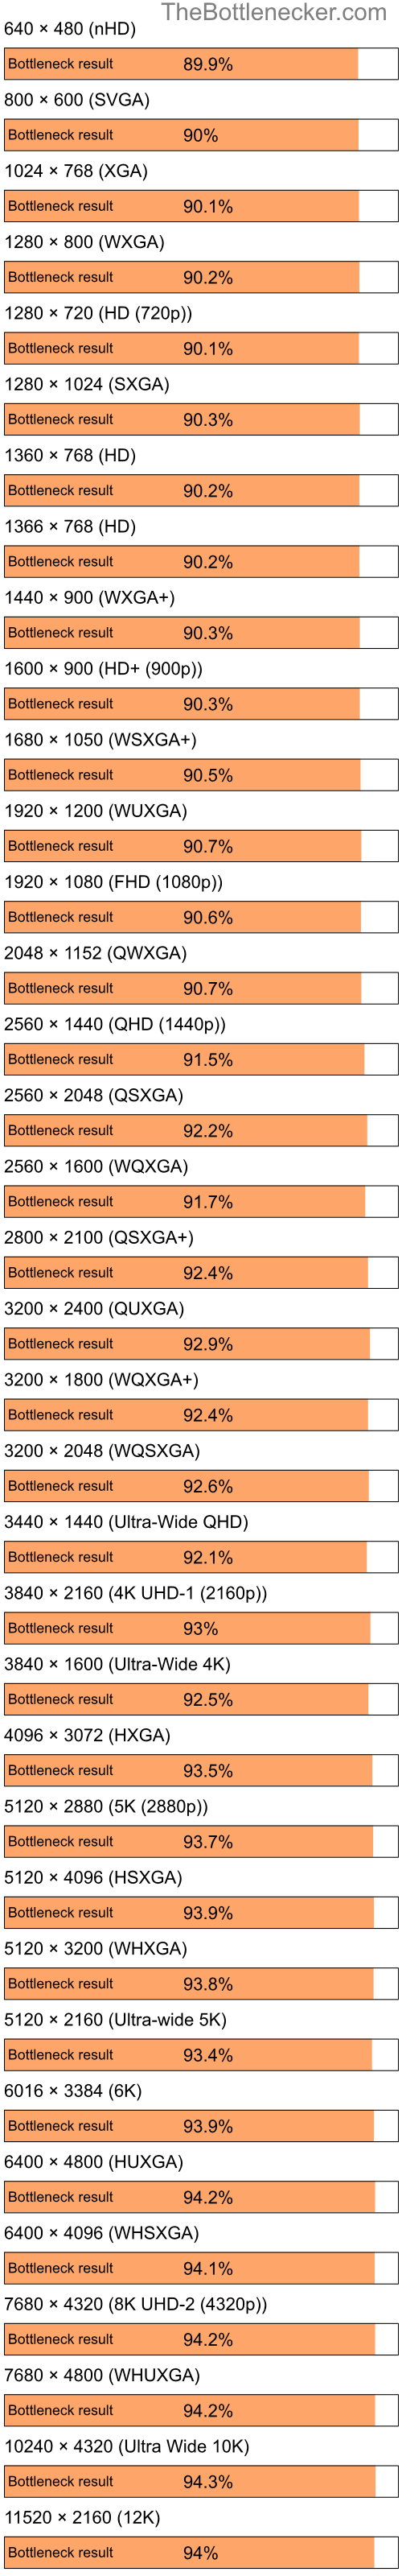 Bottleneck results by resolution for Intel Pentium 4 and NVIDIA GeForce4 Ti 4200 in Graphic Card Intense Tasks